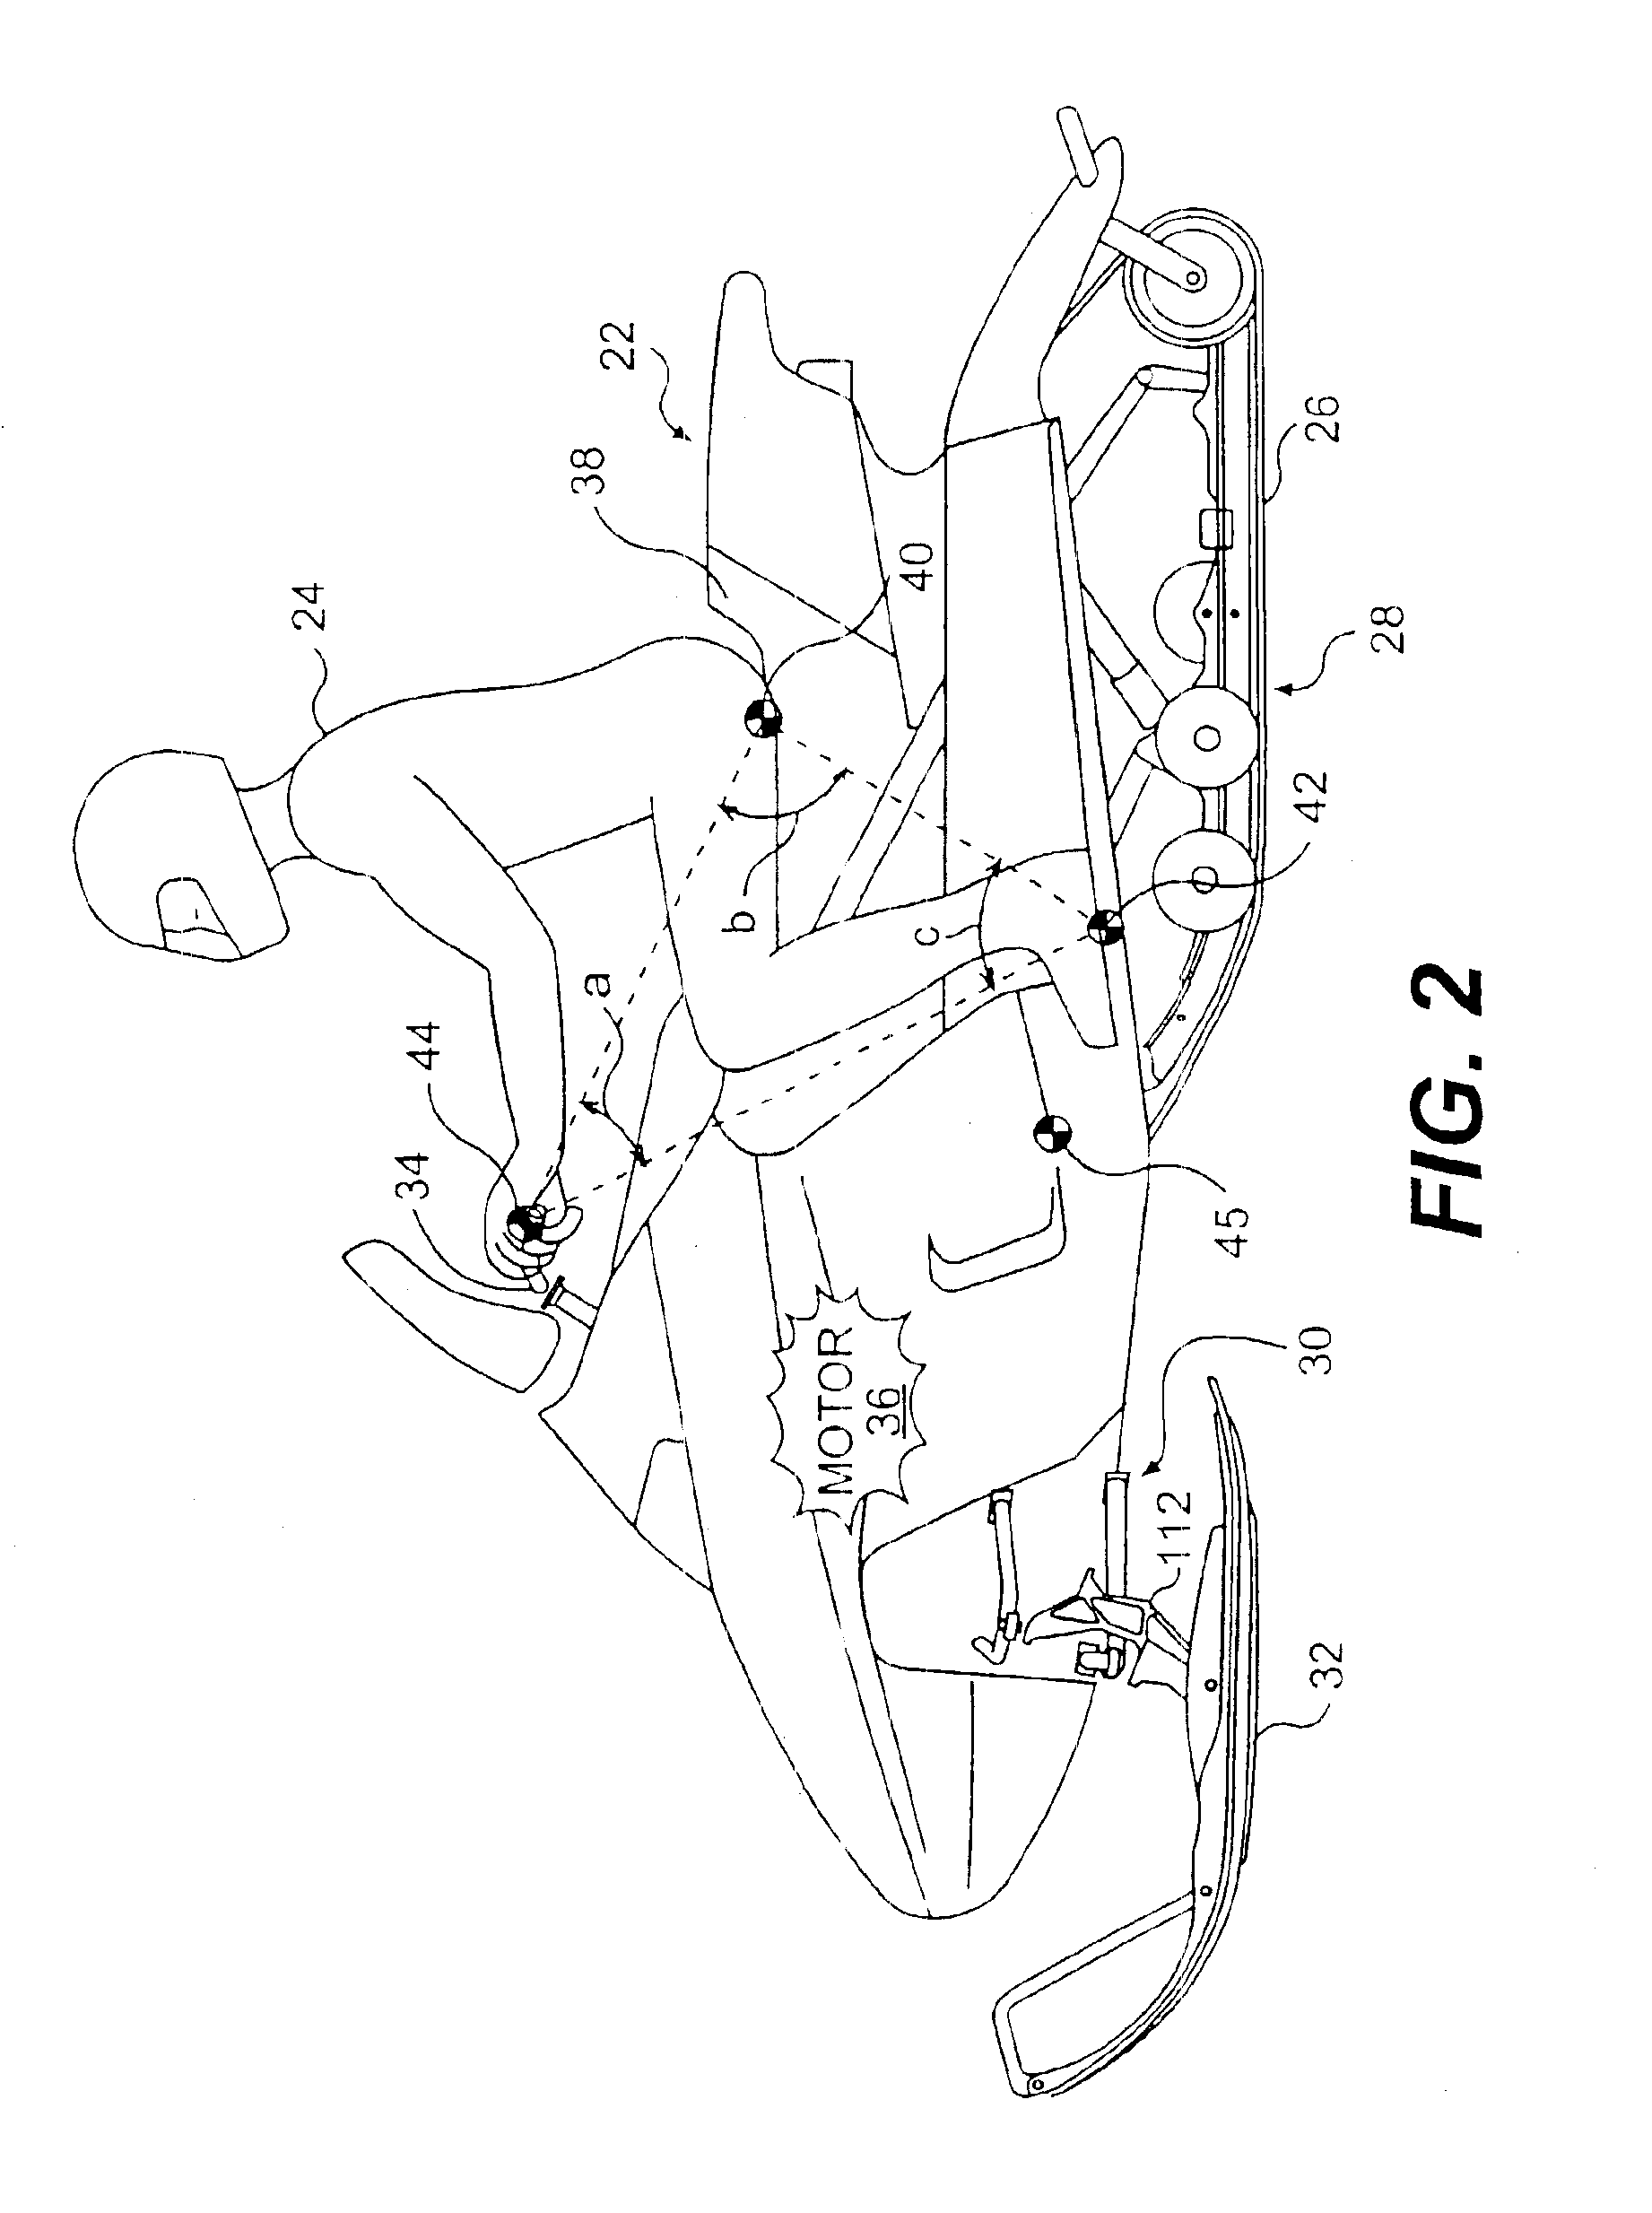 Front suspension with three ball joints for a vehicle